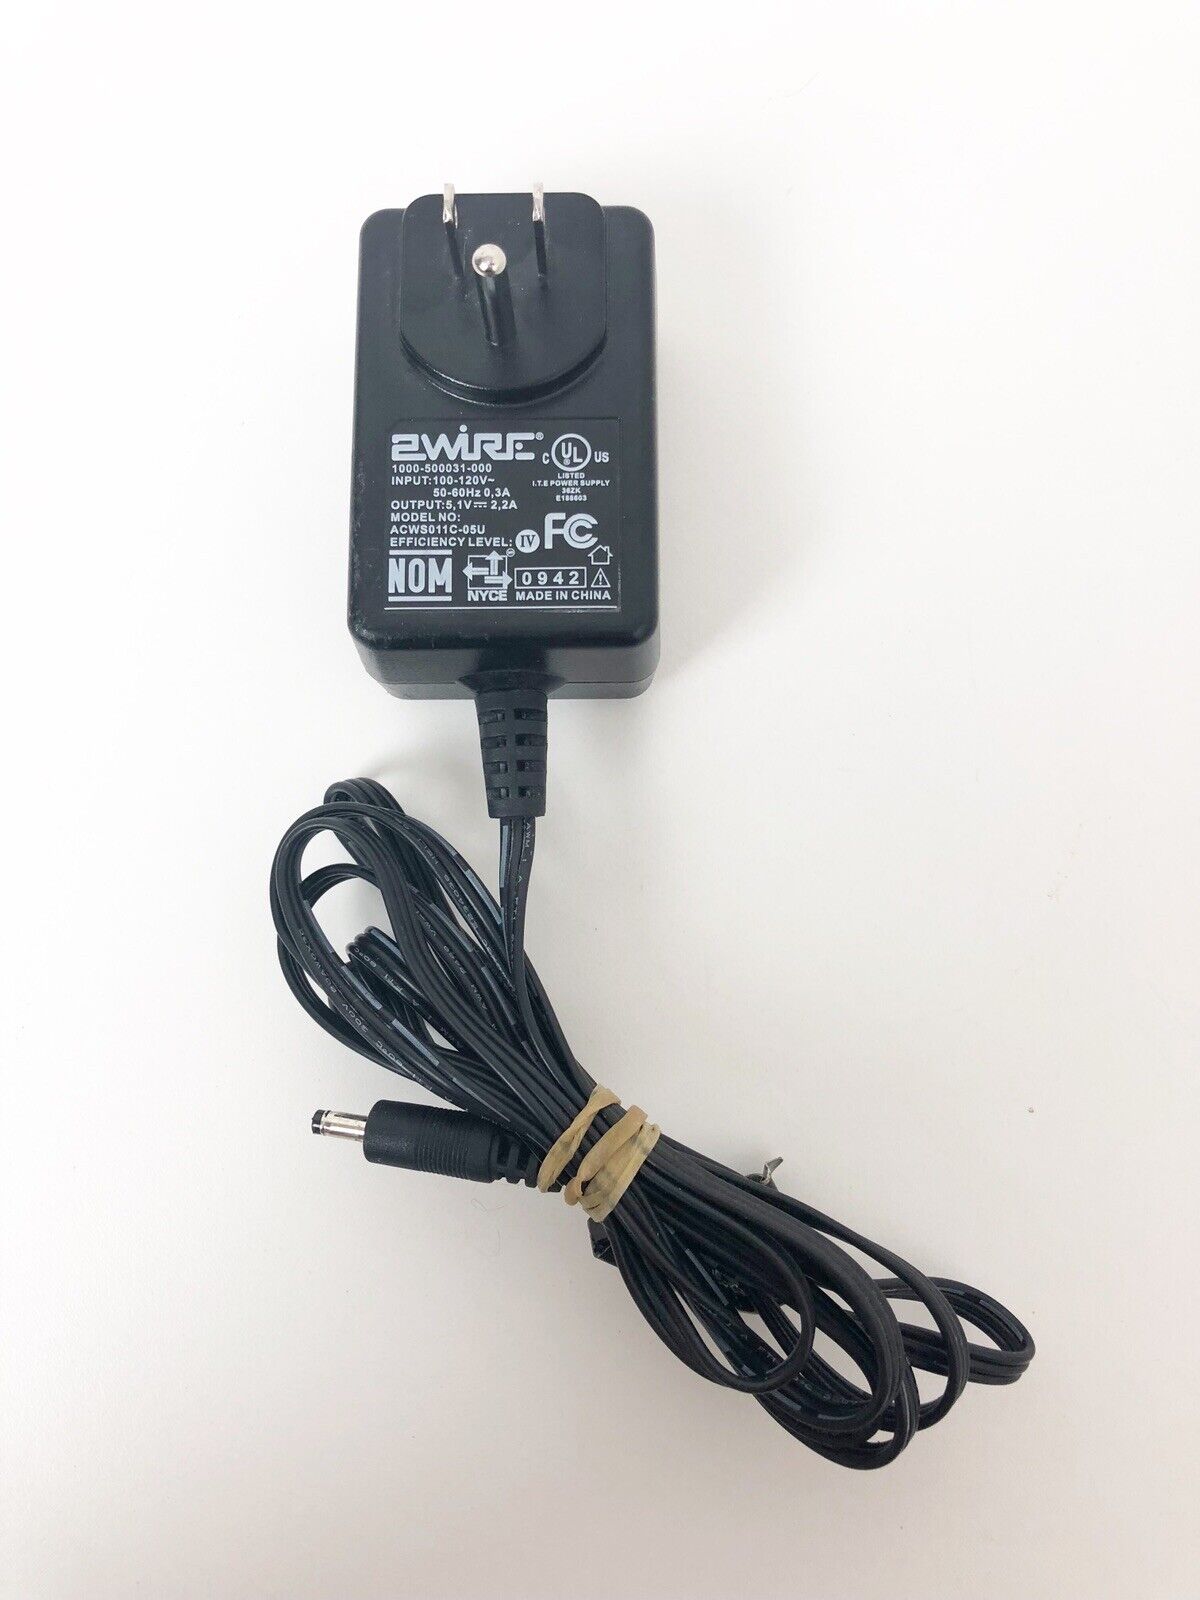 Genuine 2Wire ACWS011C-05U AC Power Supply Adapter Charger Output 5.1V 2.2A Brand: 2Wire Type: AC/AC Adapter MPN: D